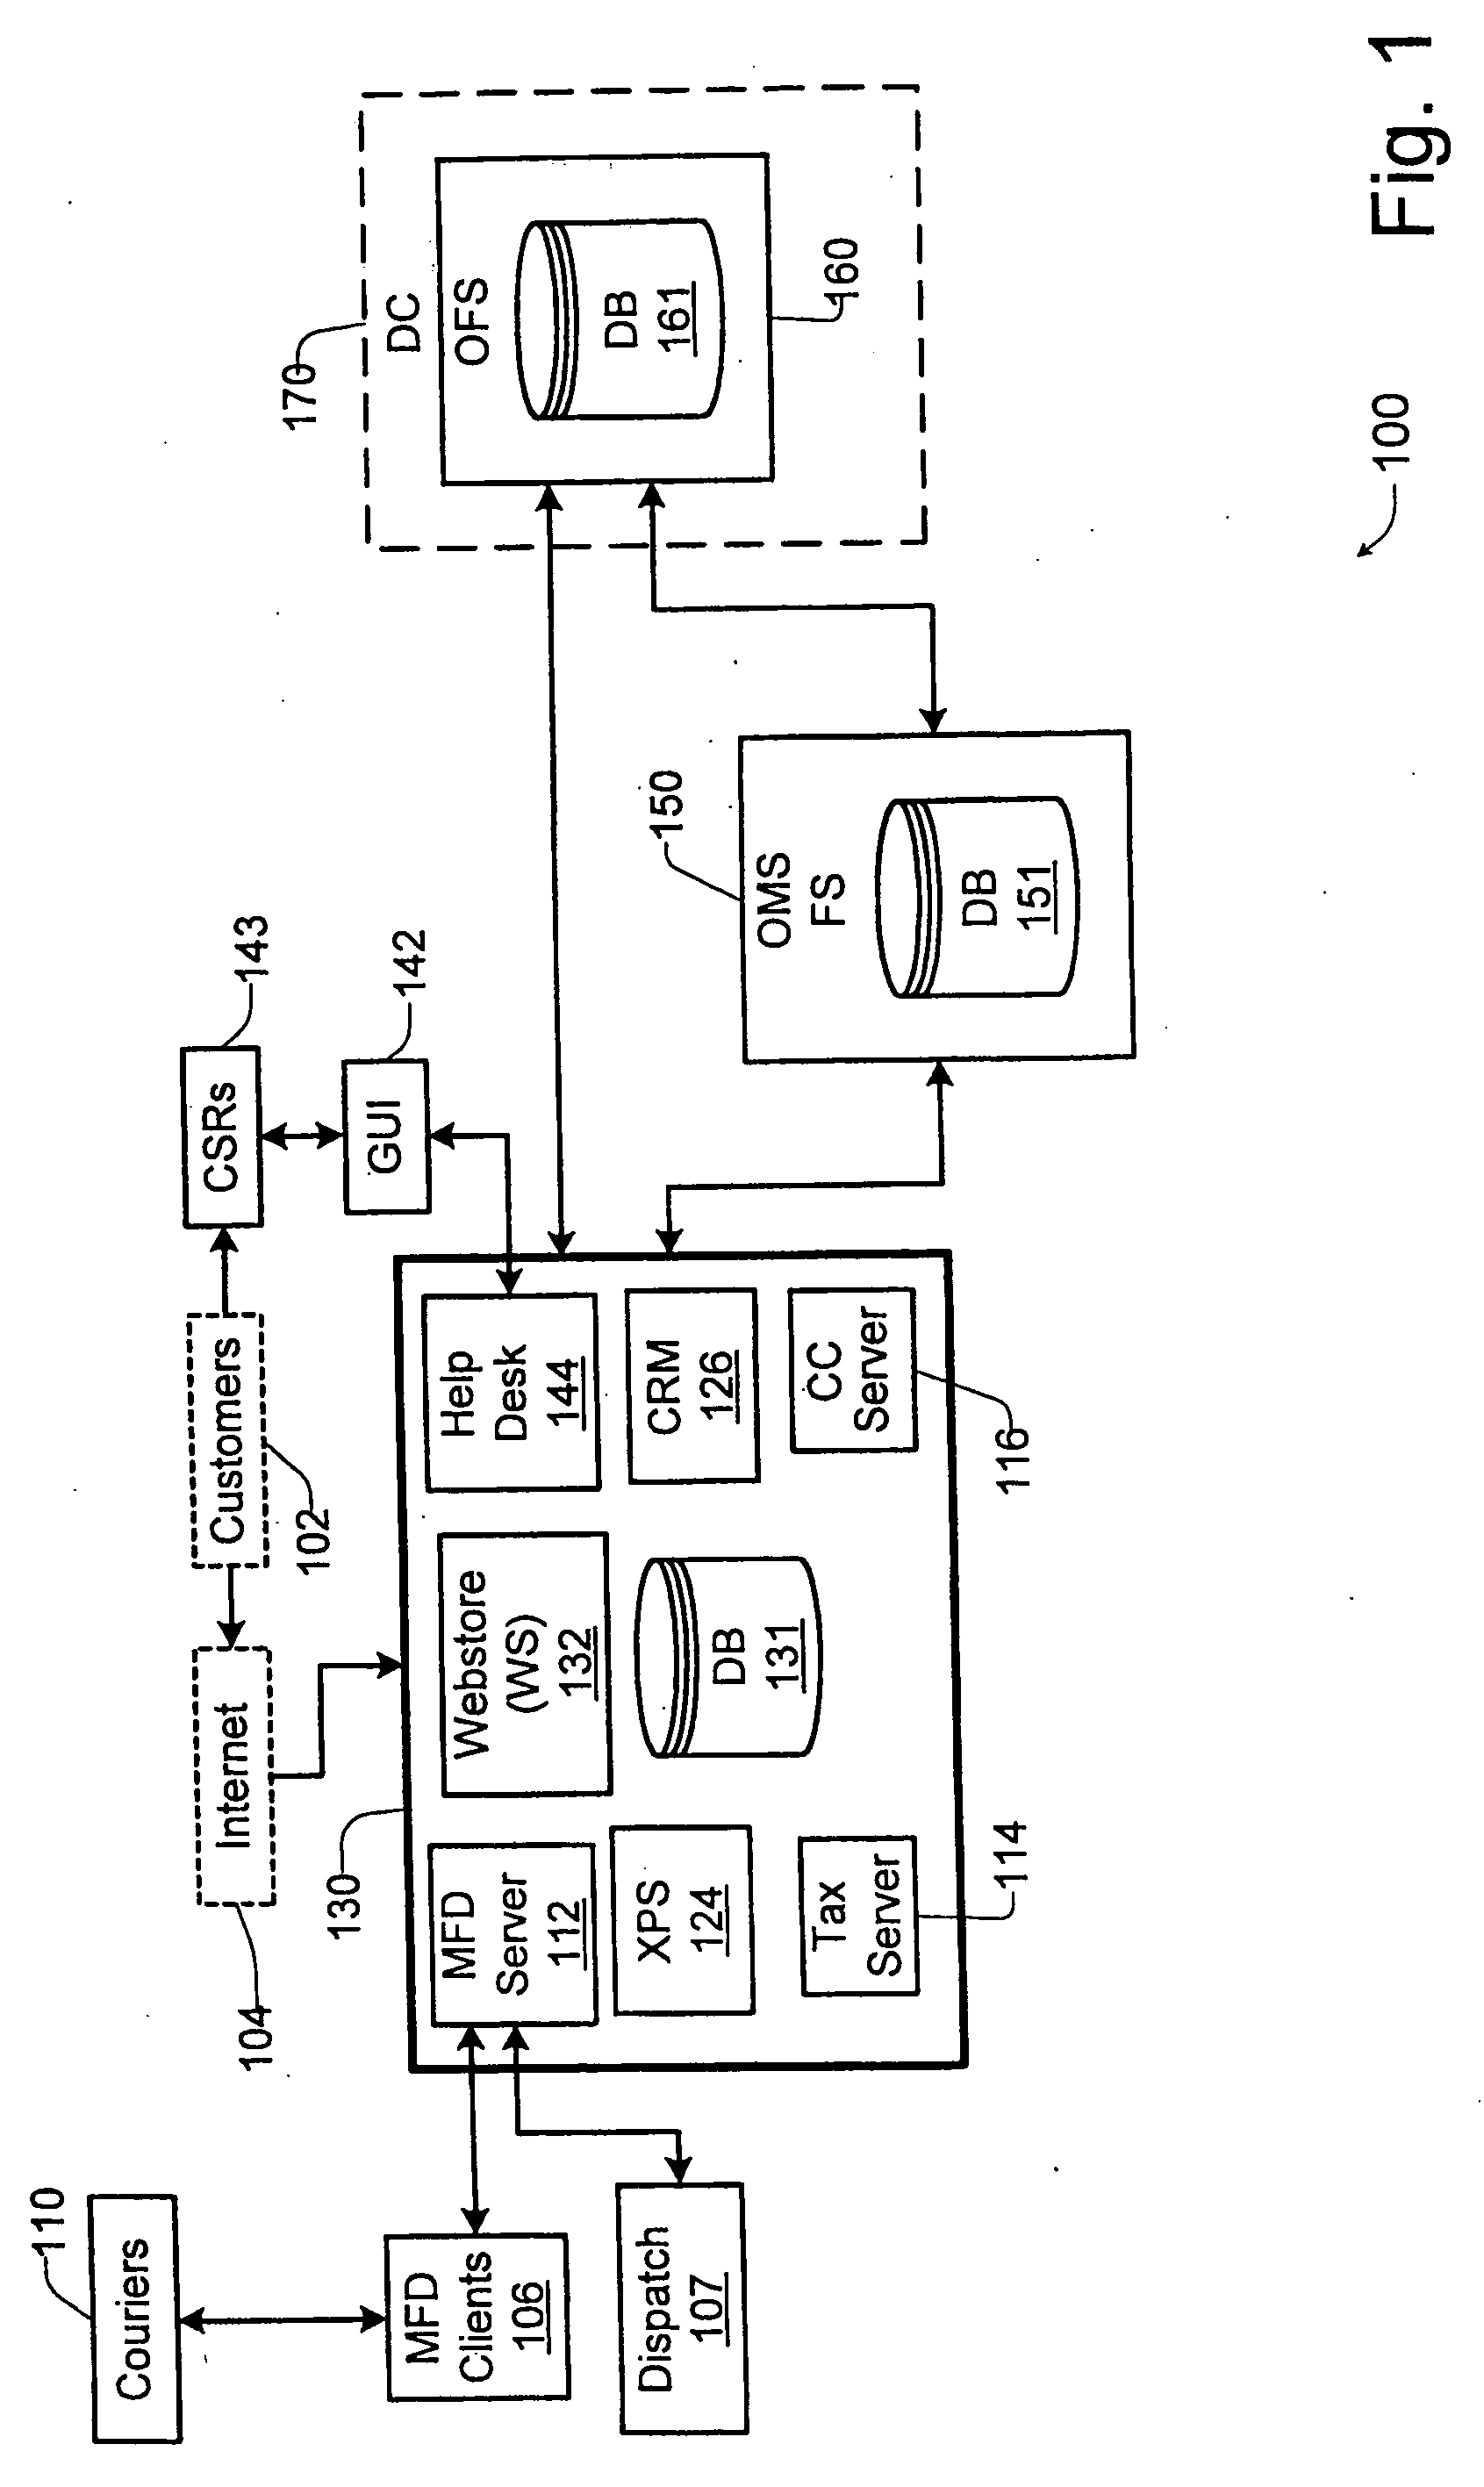 Techniques for processing customer service transactions at customer site using mobile computing device